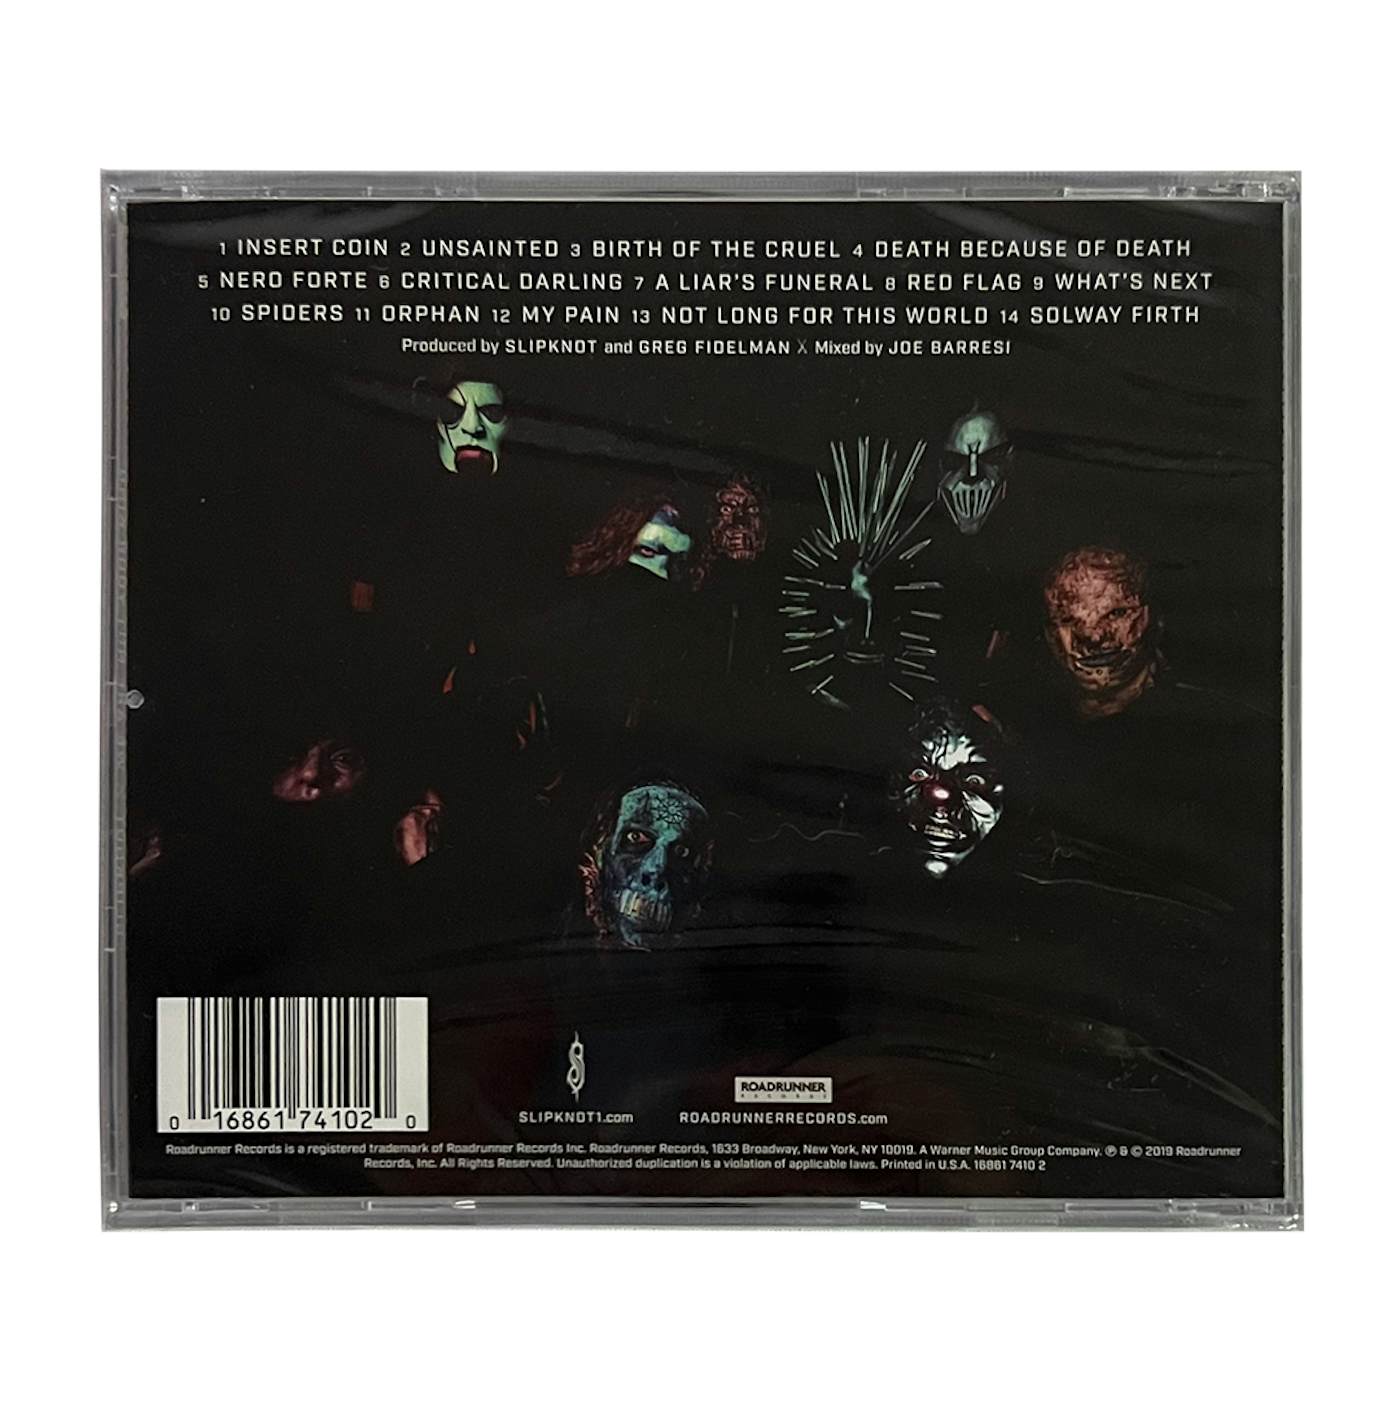 We Are Not Your Kind CD $16.00